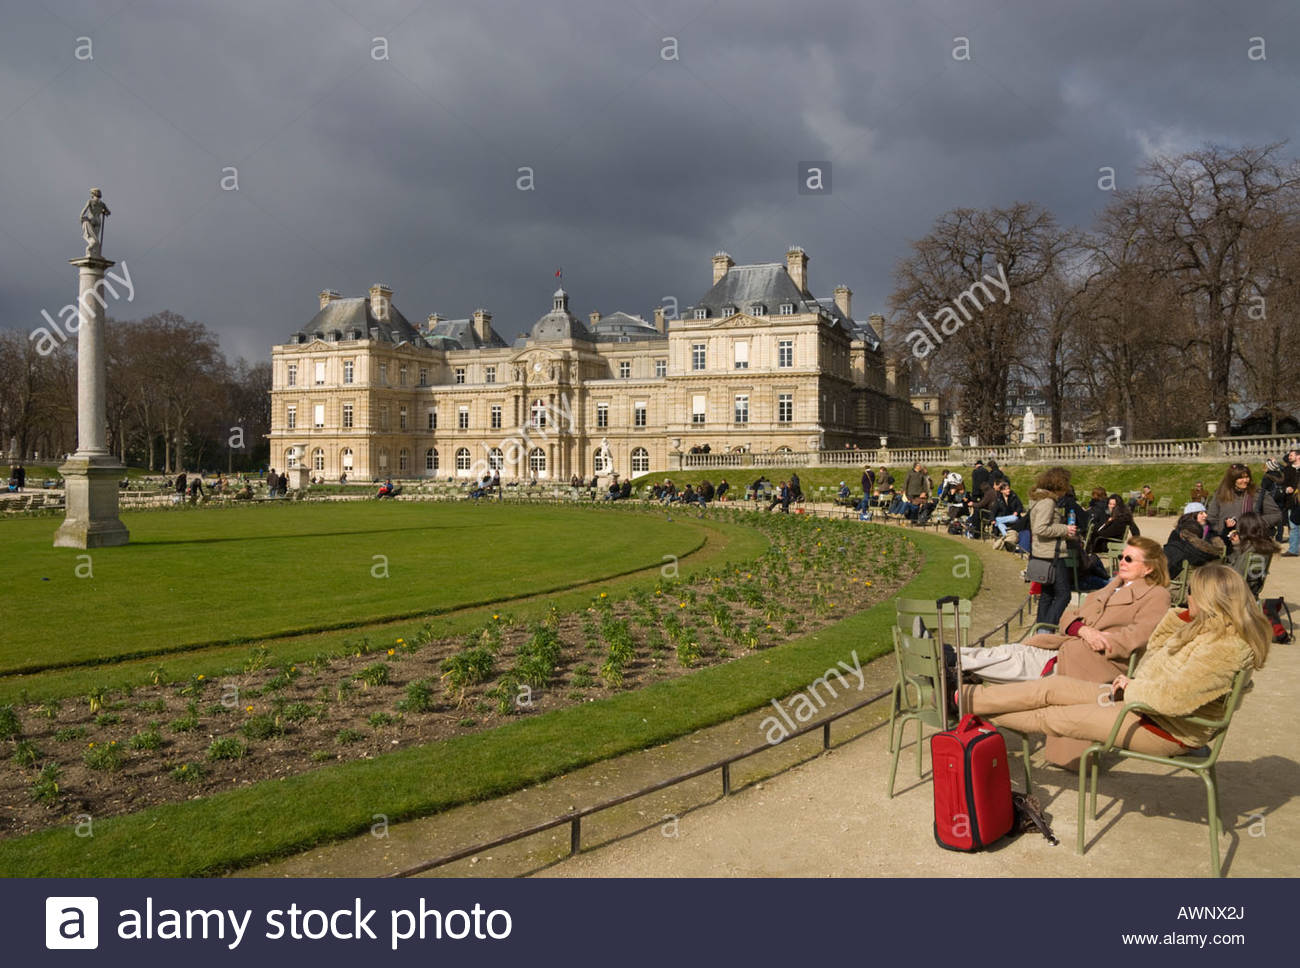 france paris 6 jardin du luxembourg view with people enjoying a sunny AWNX2J